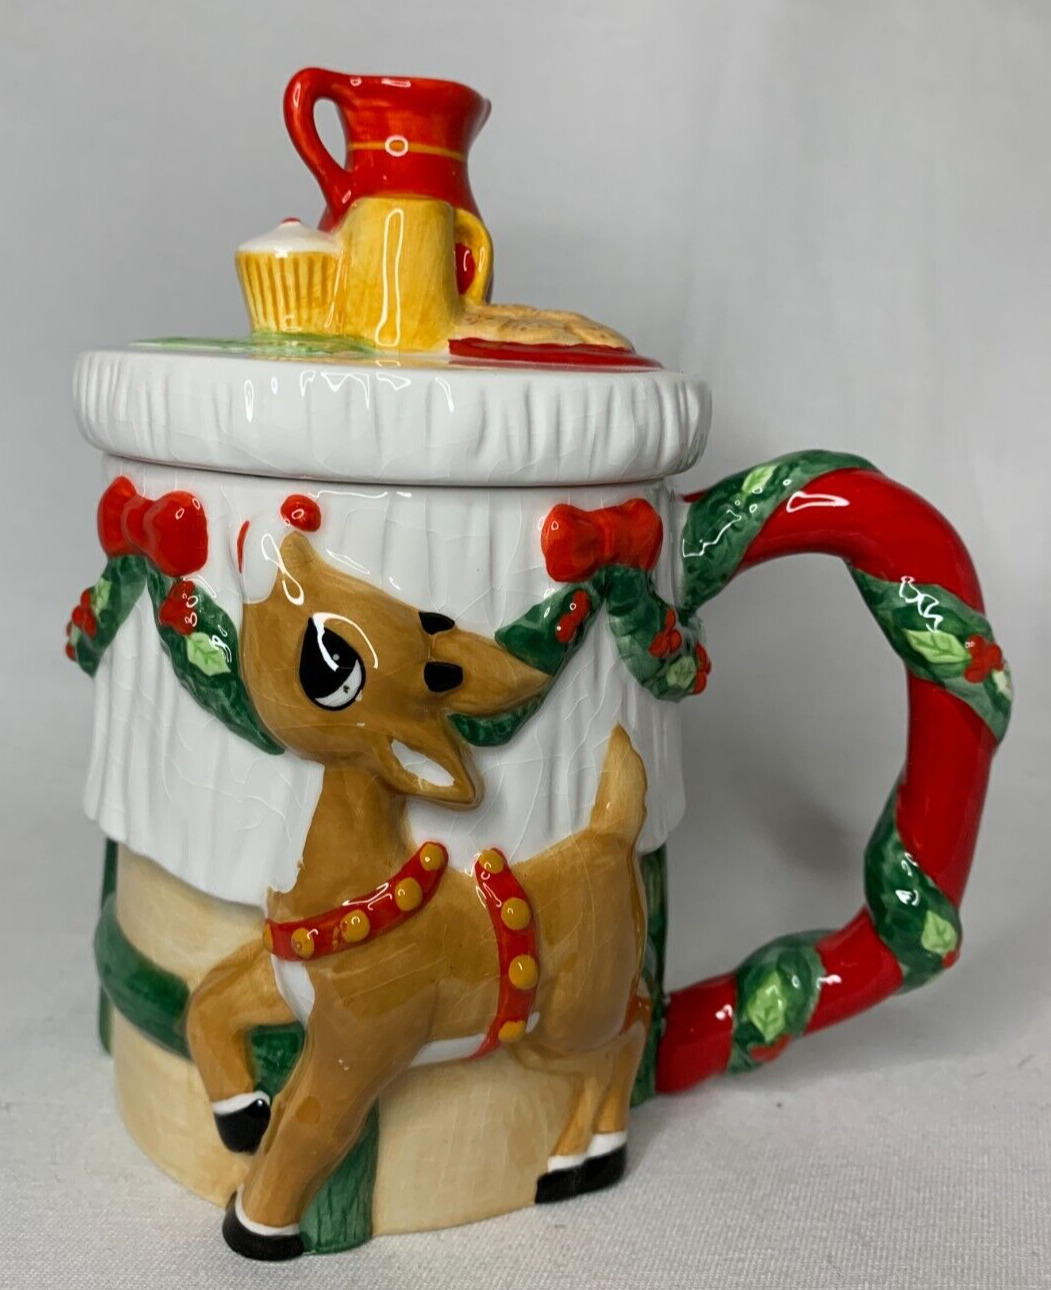 Lenox Rudolph The Red-Nosed Reindeer Mug with Lid 6 1/4 inch Red handle 2002